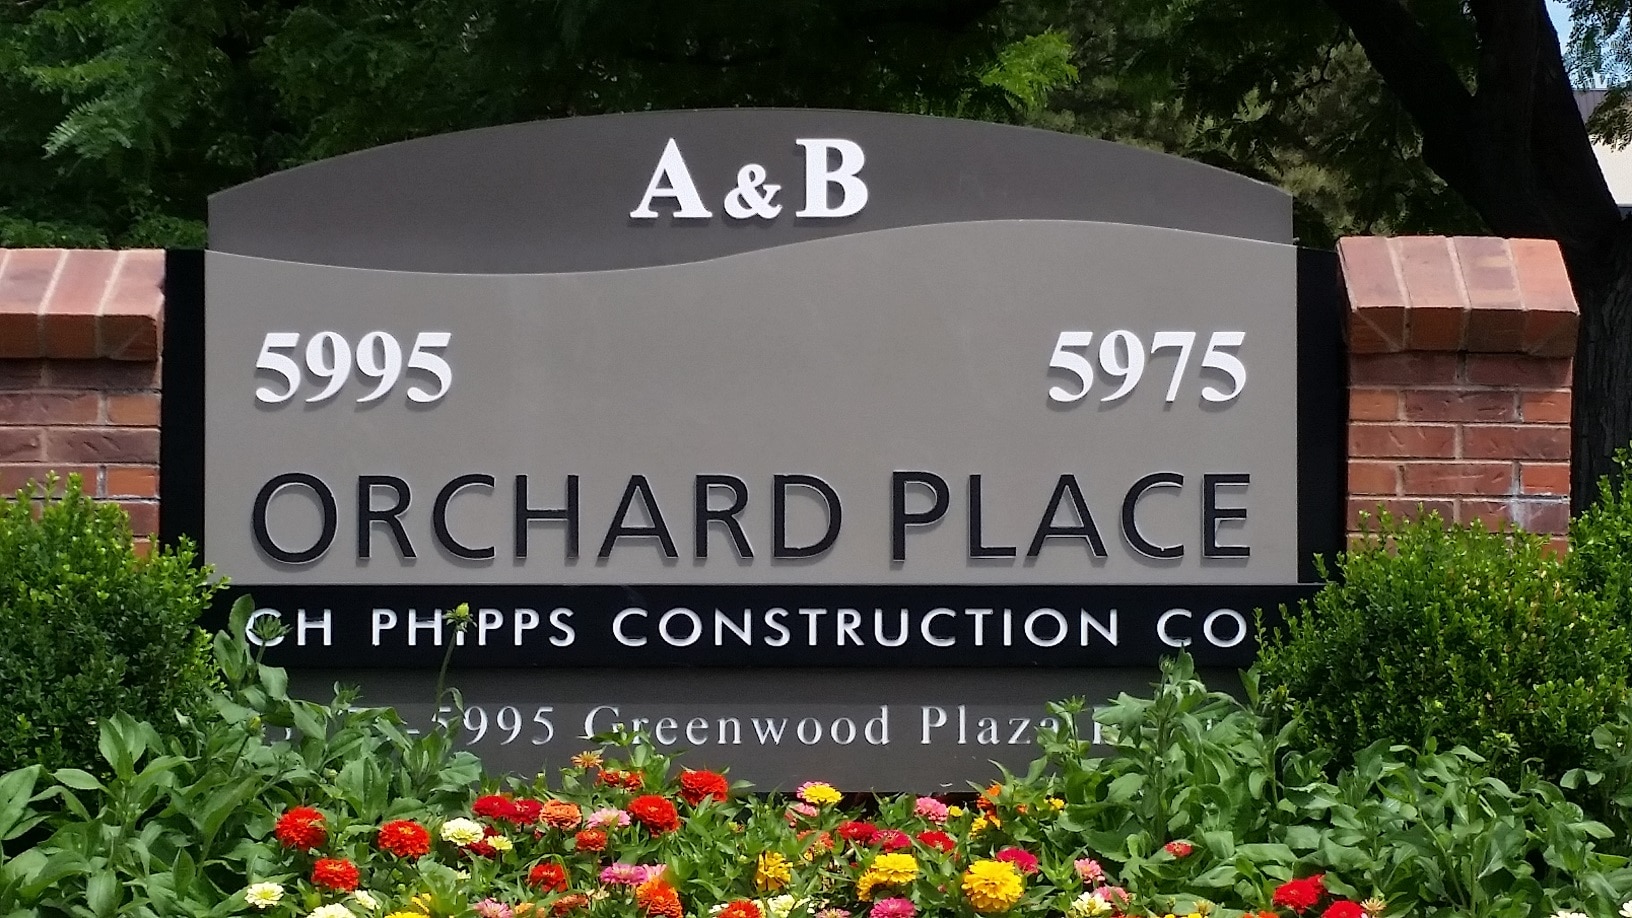 Orchard Place Building Sign 5995 orchard place A and B phipps construction company